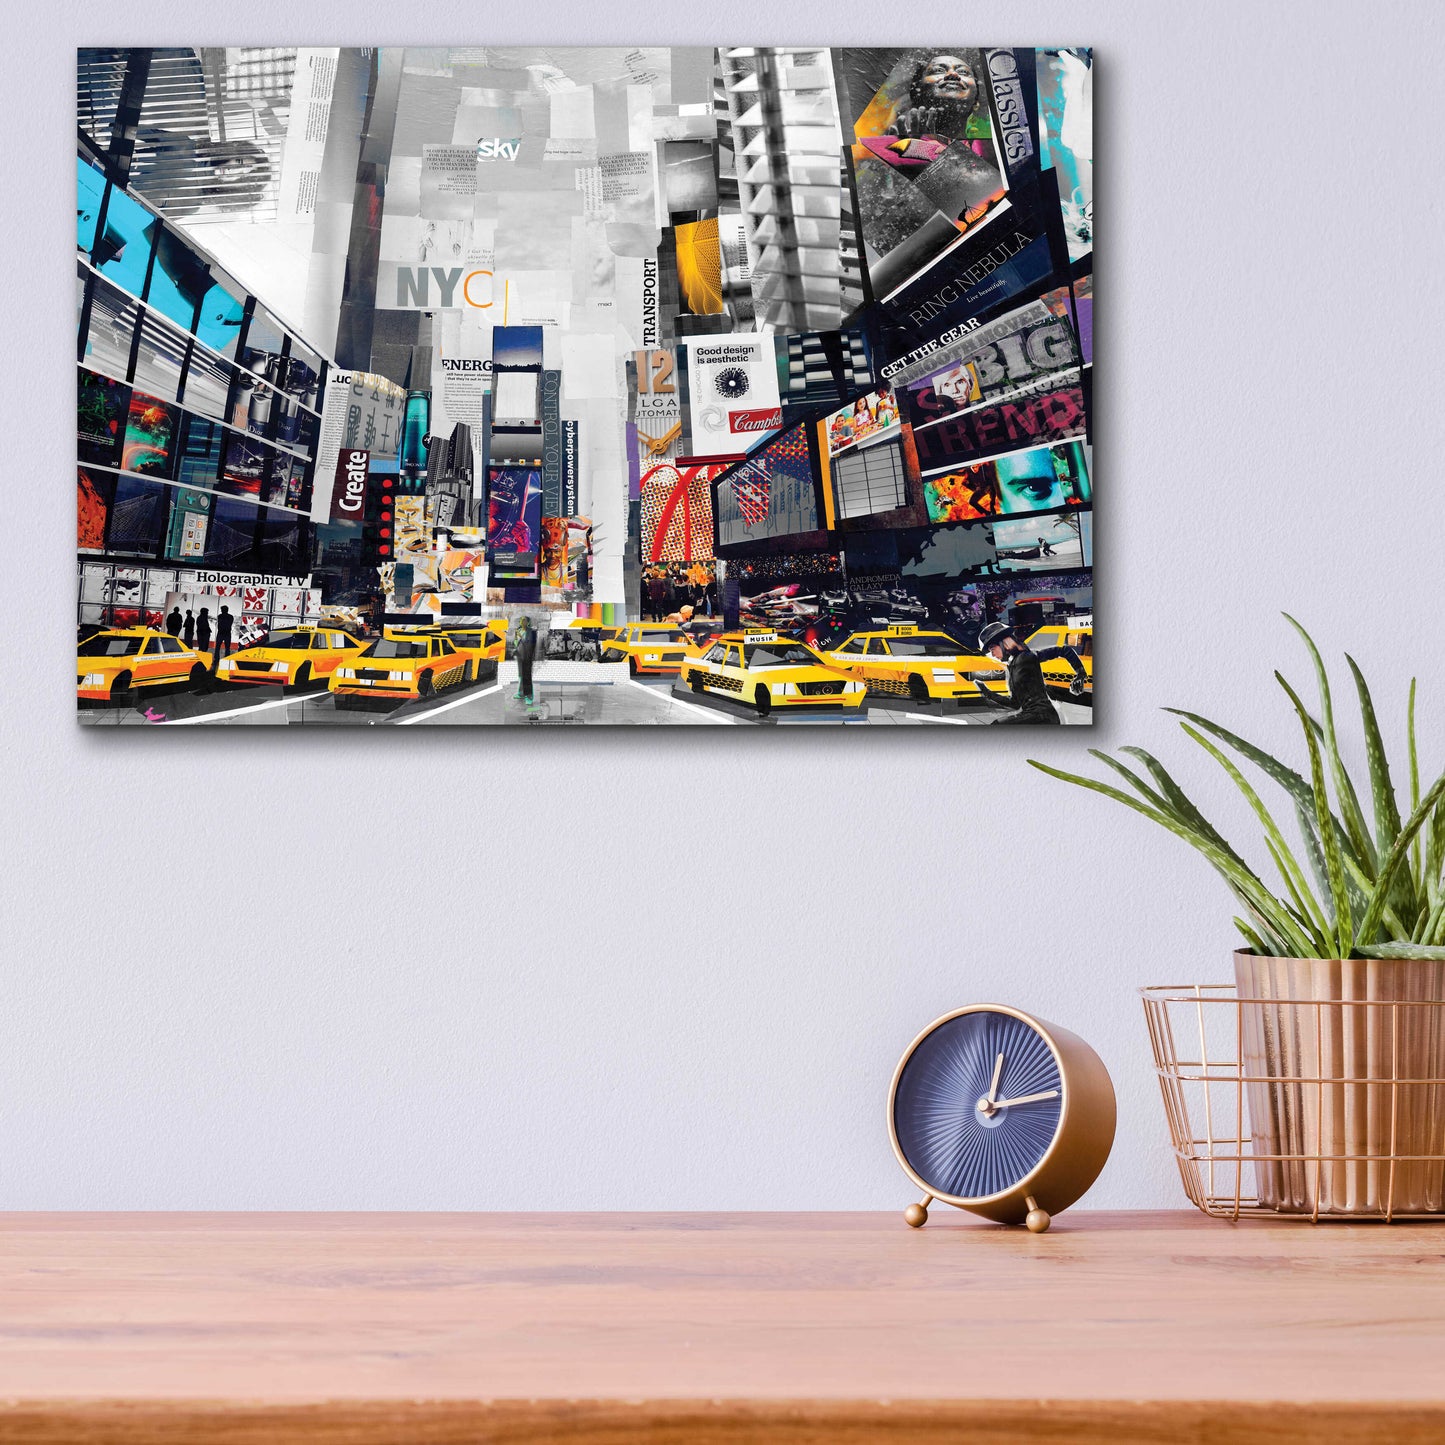 Epic Art 'Times Square' by Grey, Acrylic Glass Wall Art,16x12